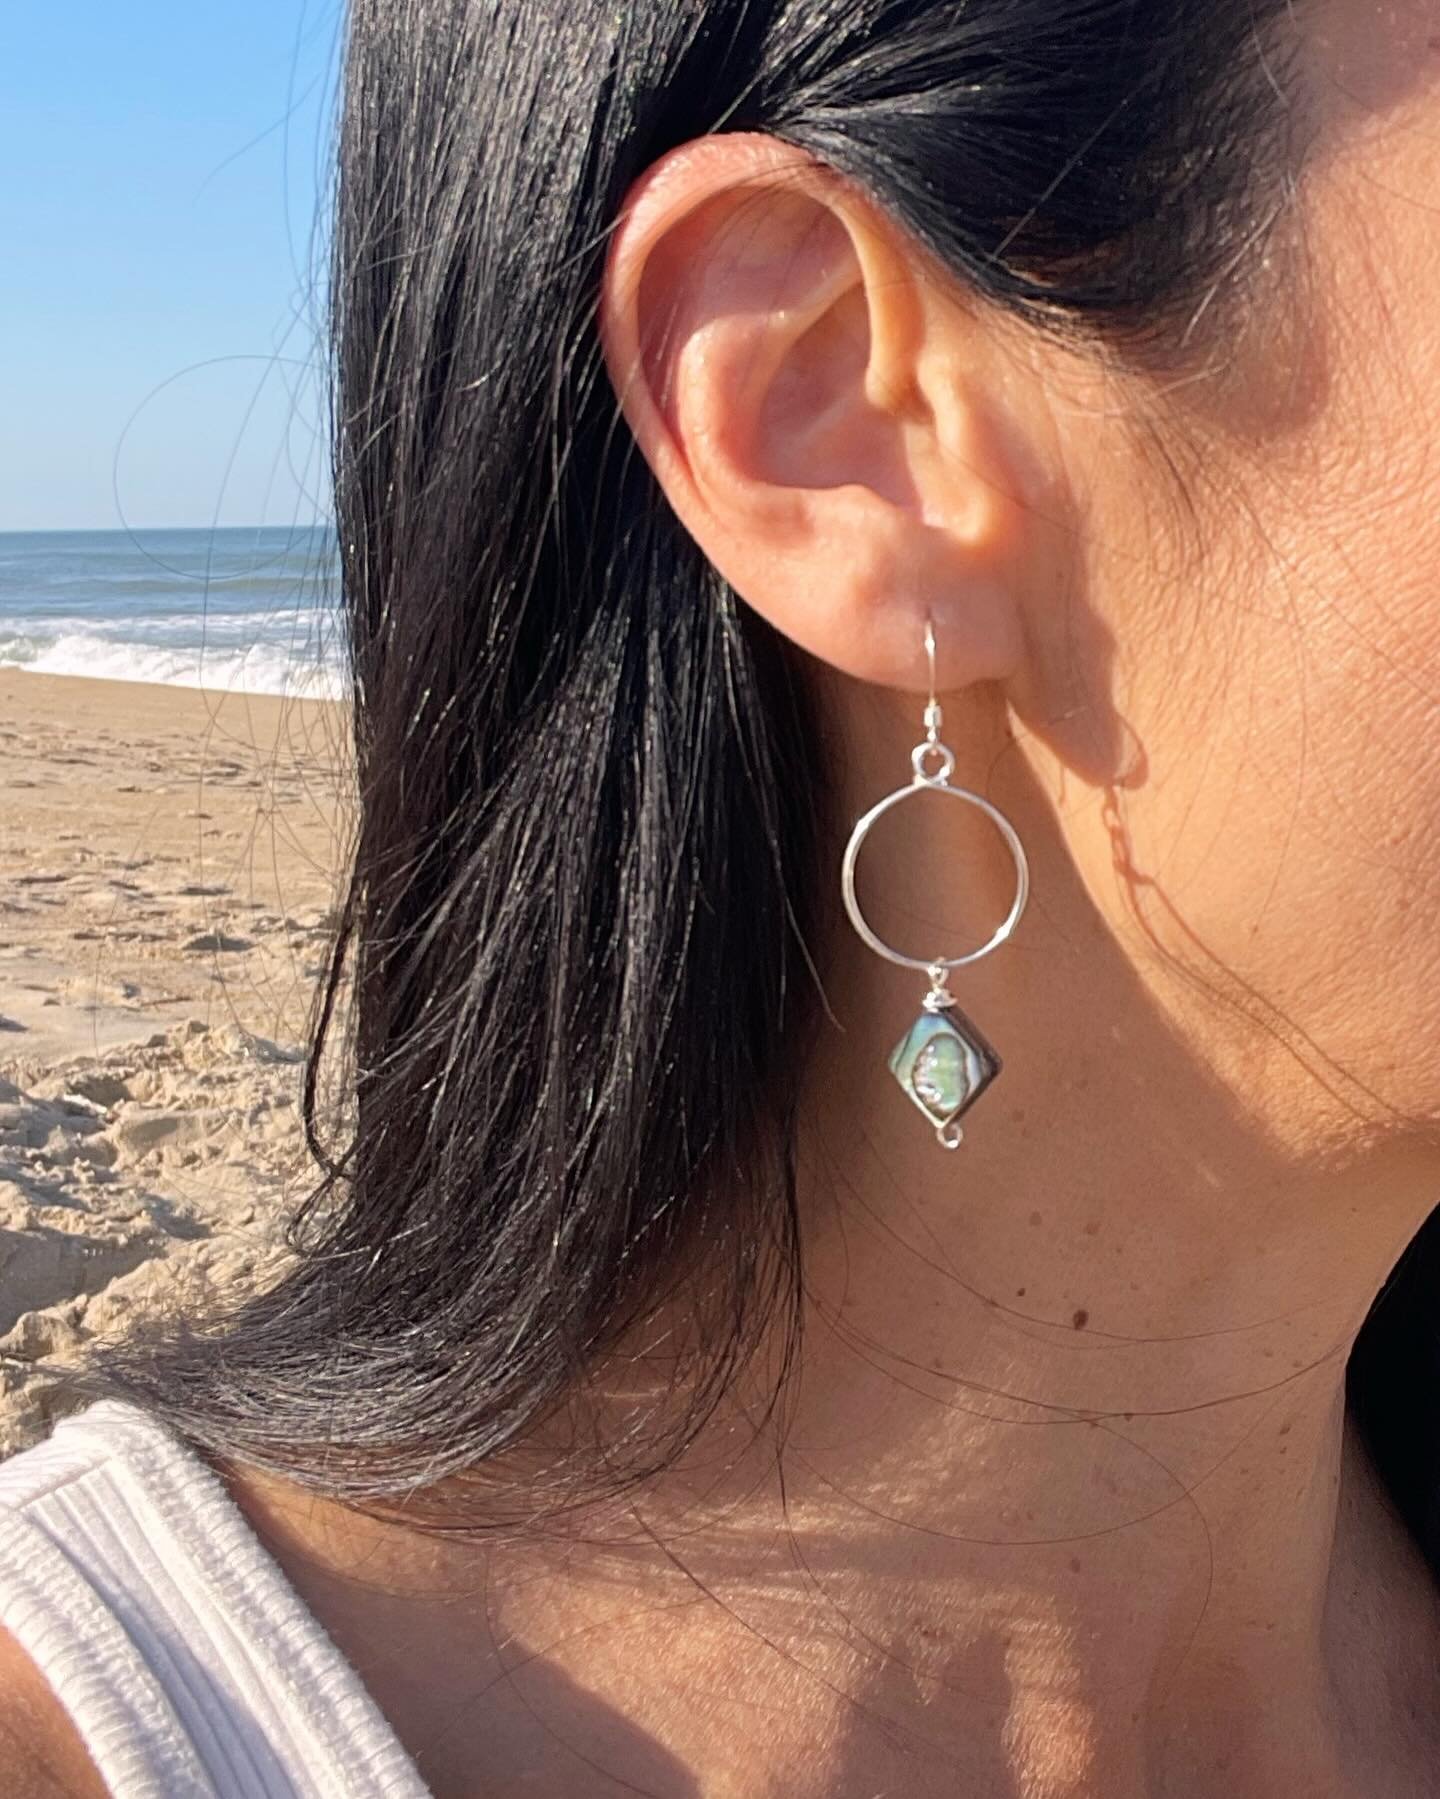 Beach vibes from the Outer Banks! New abalone earrings just listed.